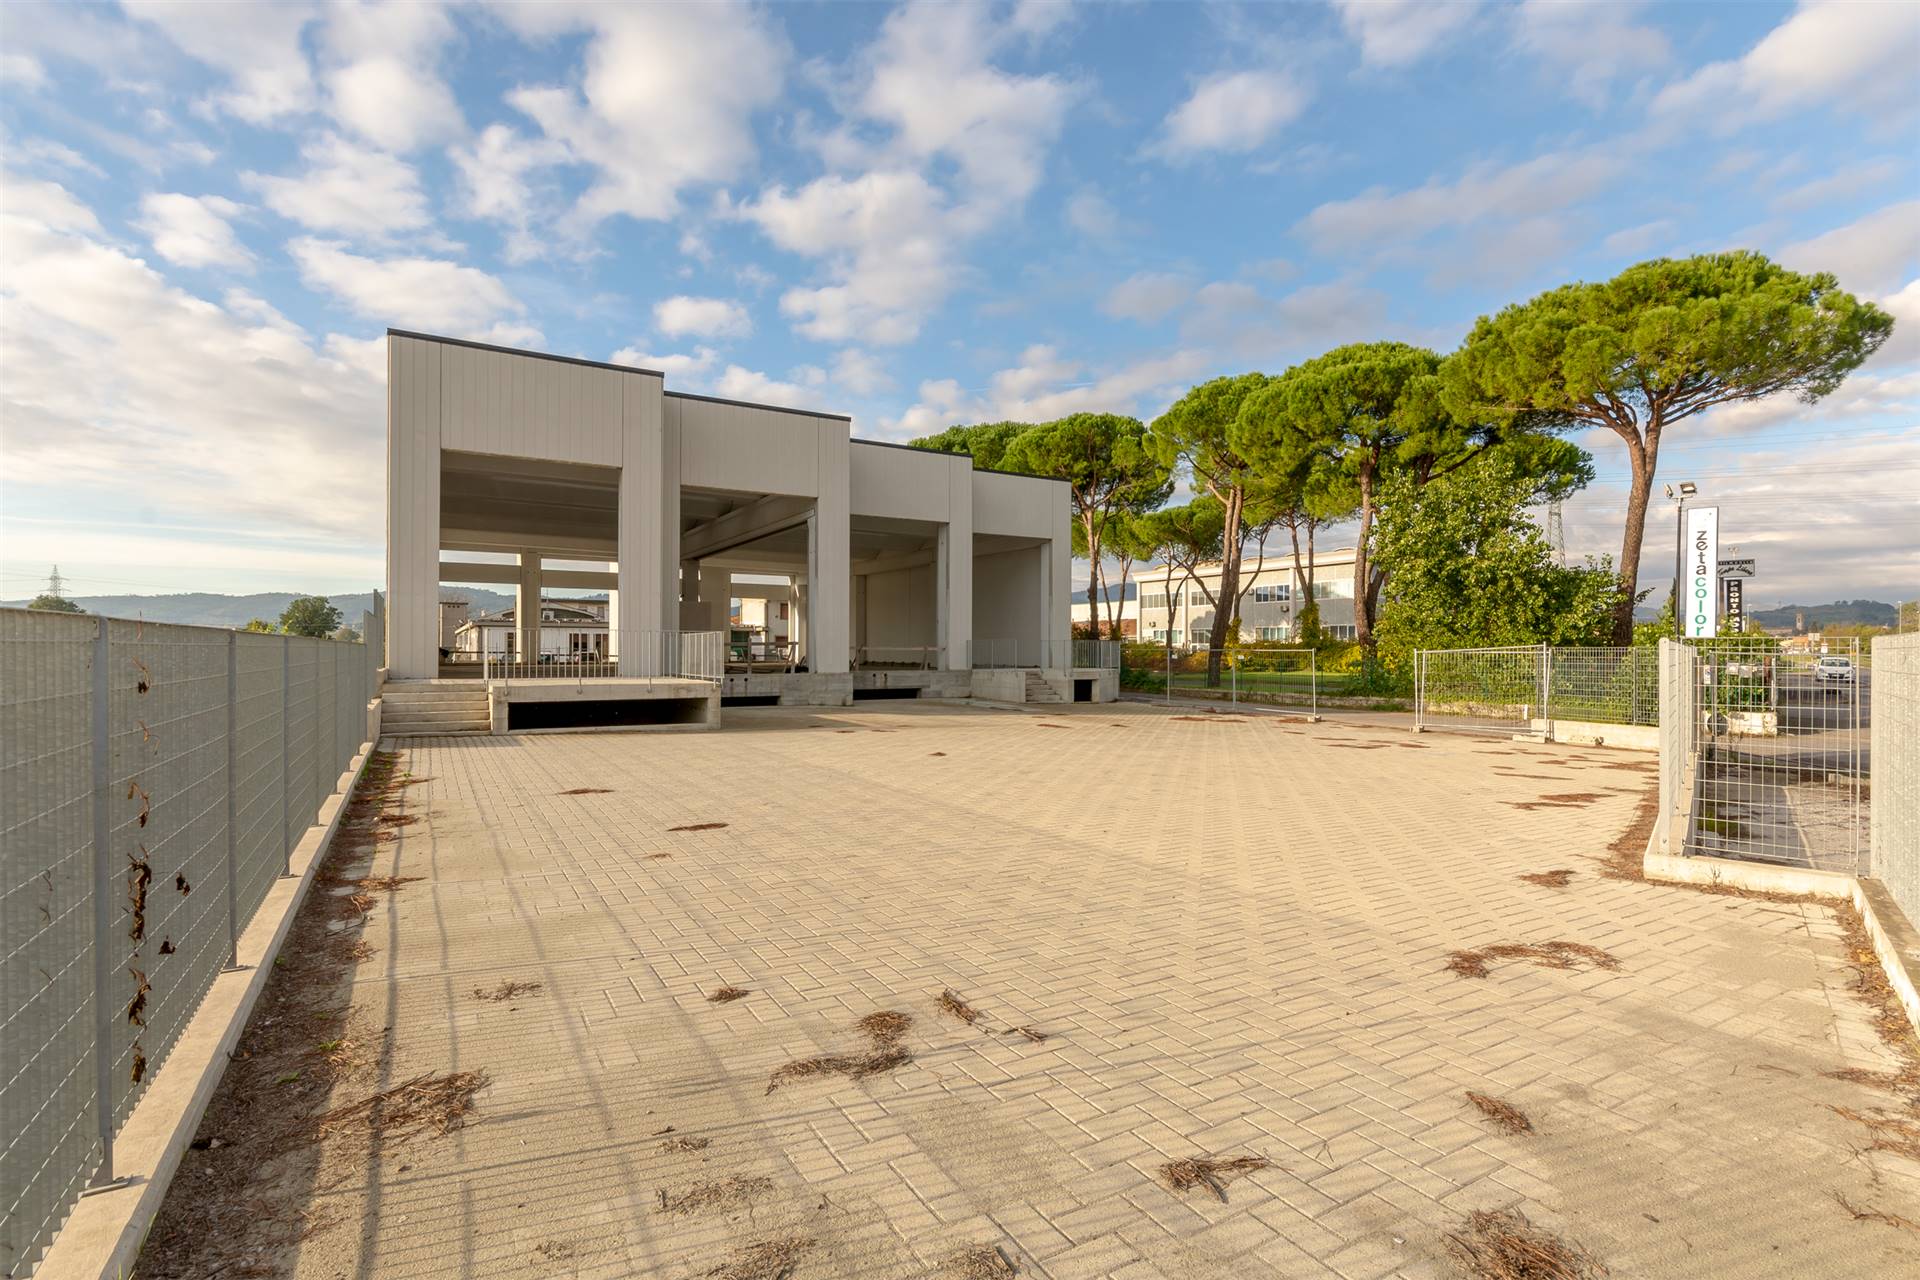 SANT'ANGELO, SIGNA, Industrial warehouse for rent of 720 Sq. mt., New construction, Heating Individual heating system, Energetic class: G, placed at 